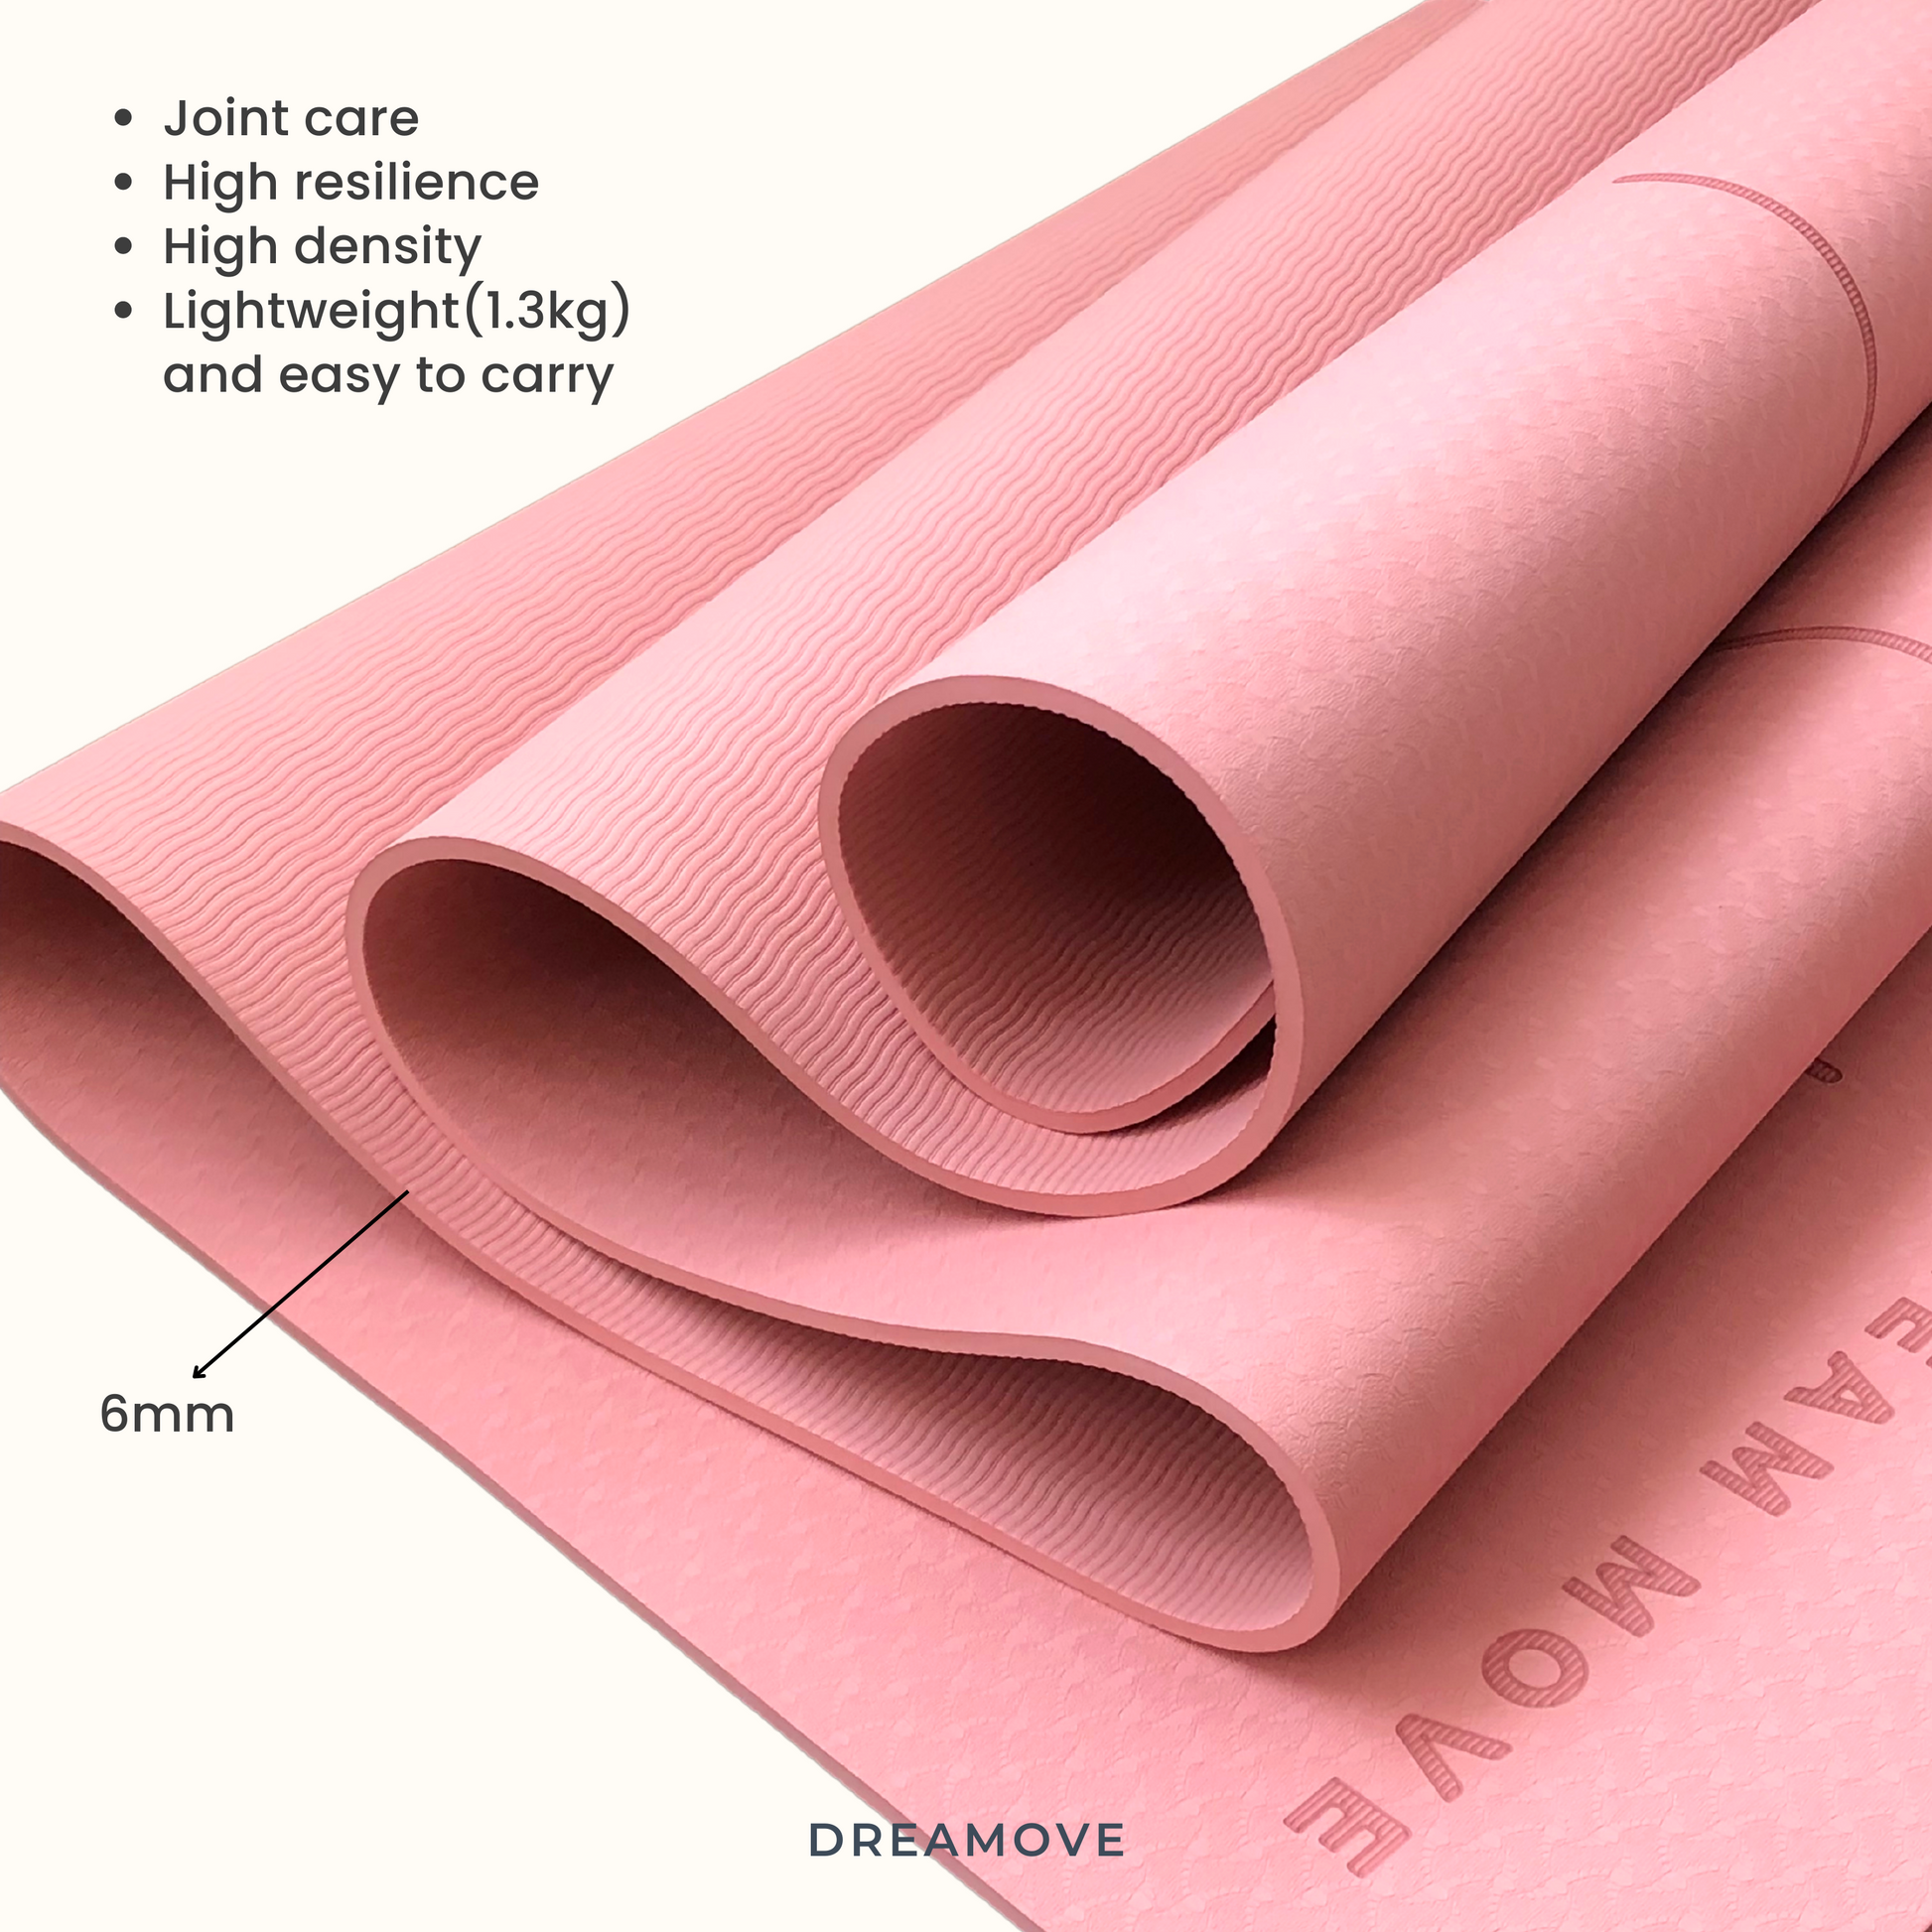 Shop Yoga Mats Online - Non Slips, Simple Alignment and More